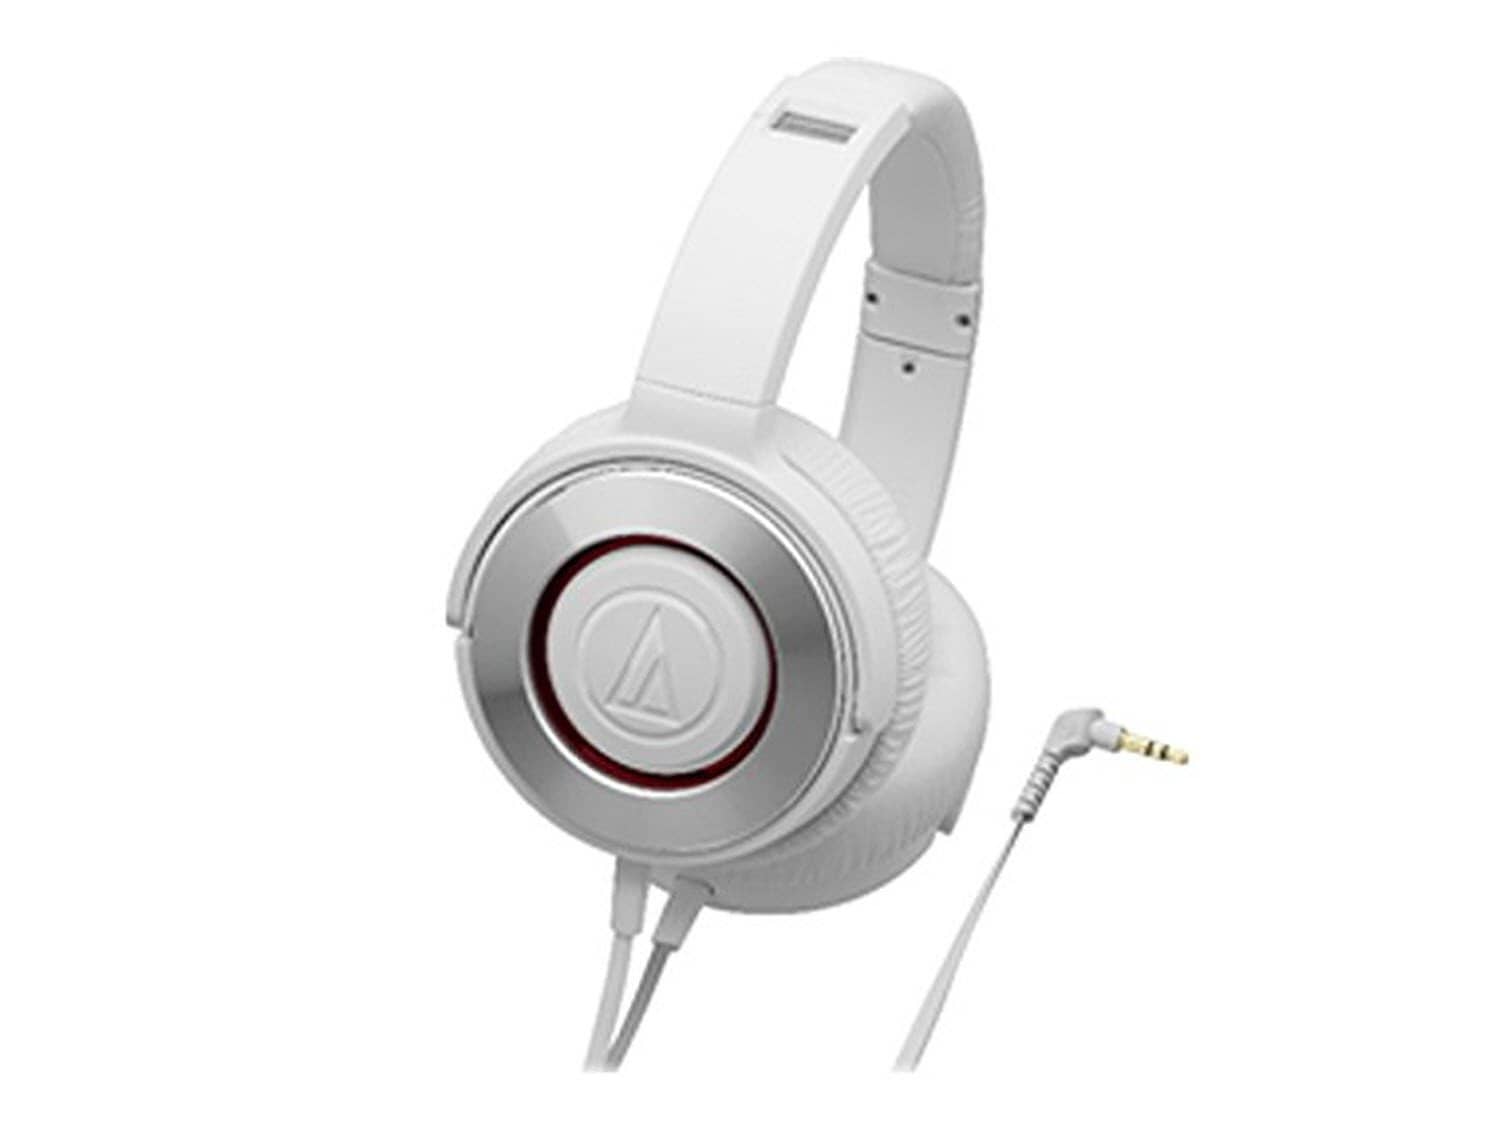 Audio-Technica SOLID BASS Portable Headphone White ATH-WS550 WH